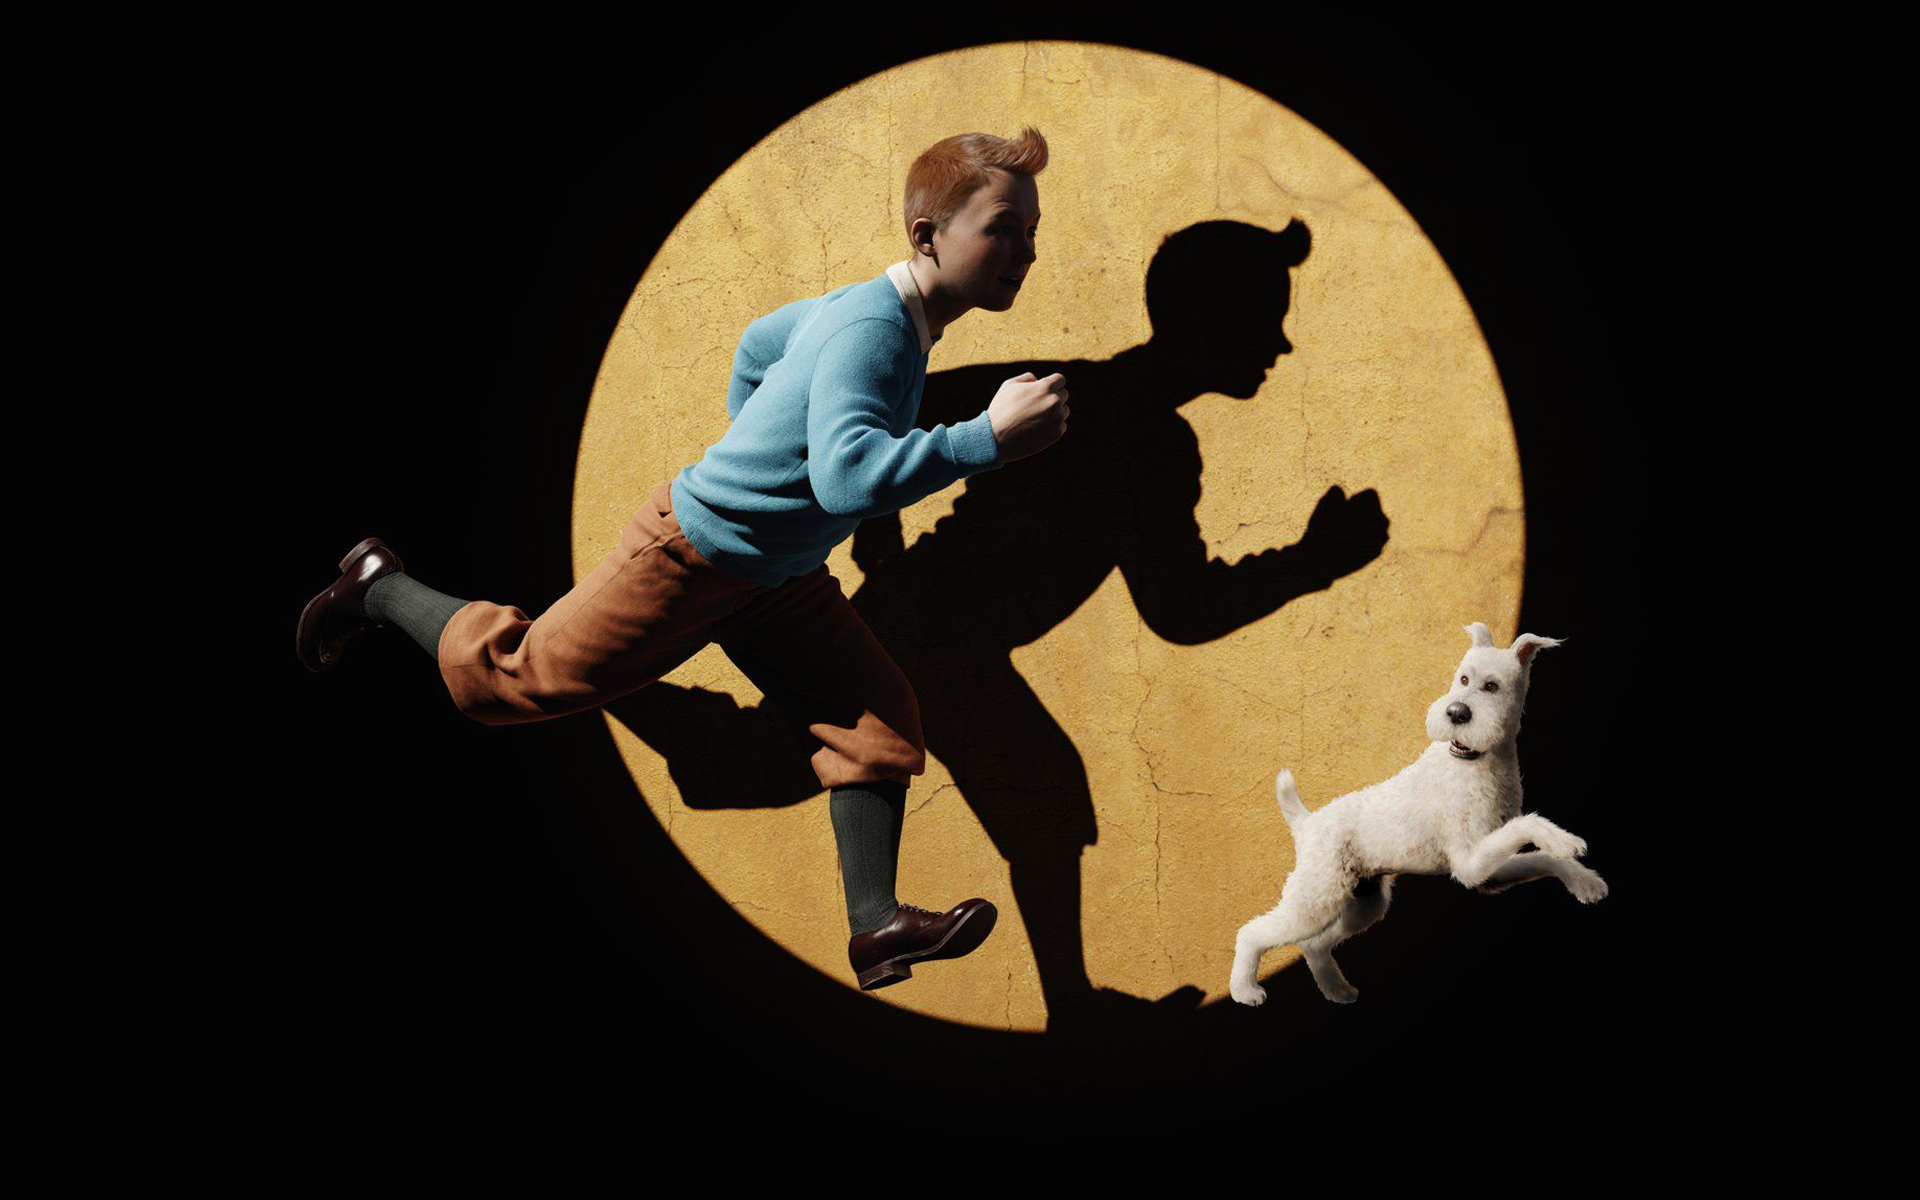 Wallpapers Tagged With TINTIN | TINTIN HD Wallpapers | Page 1